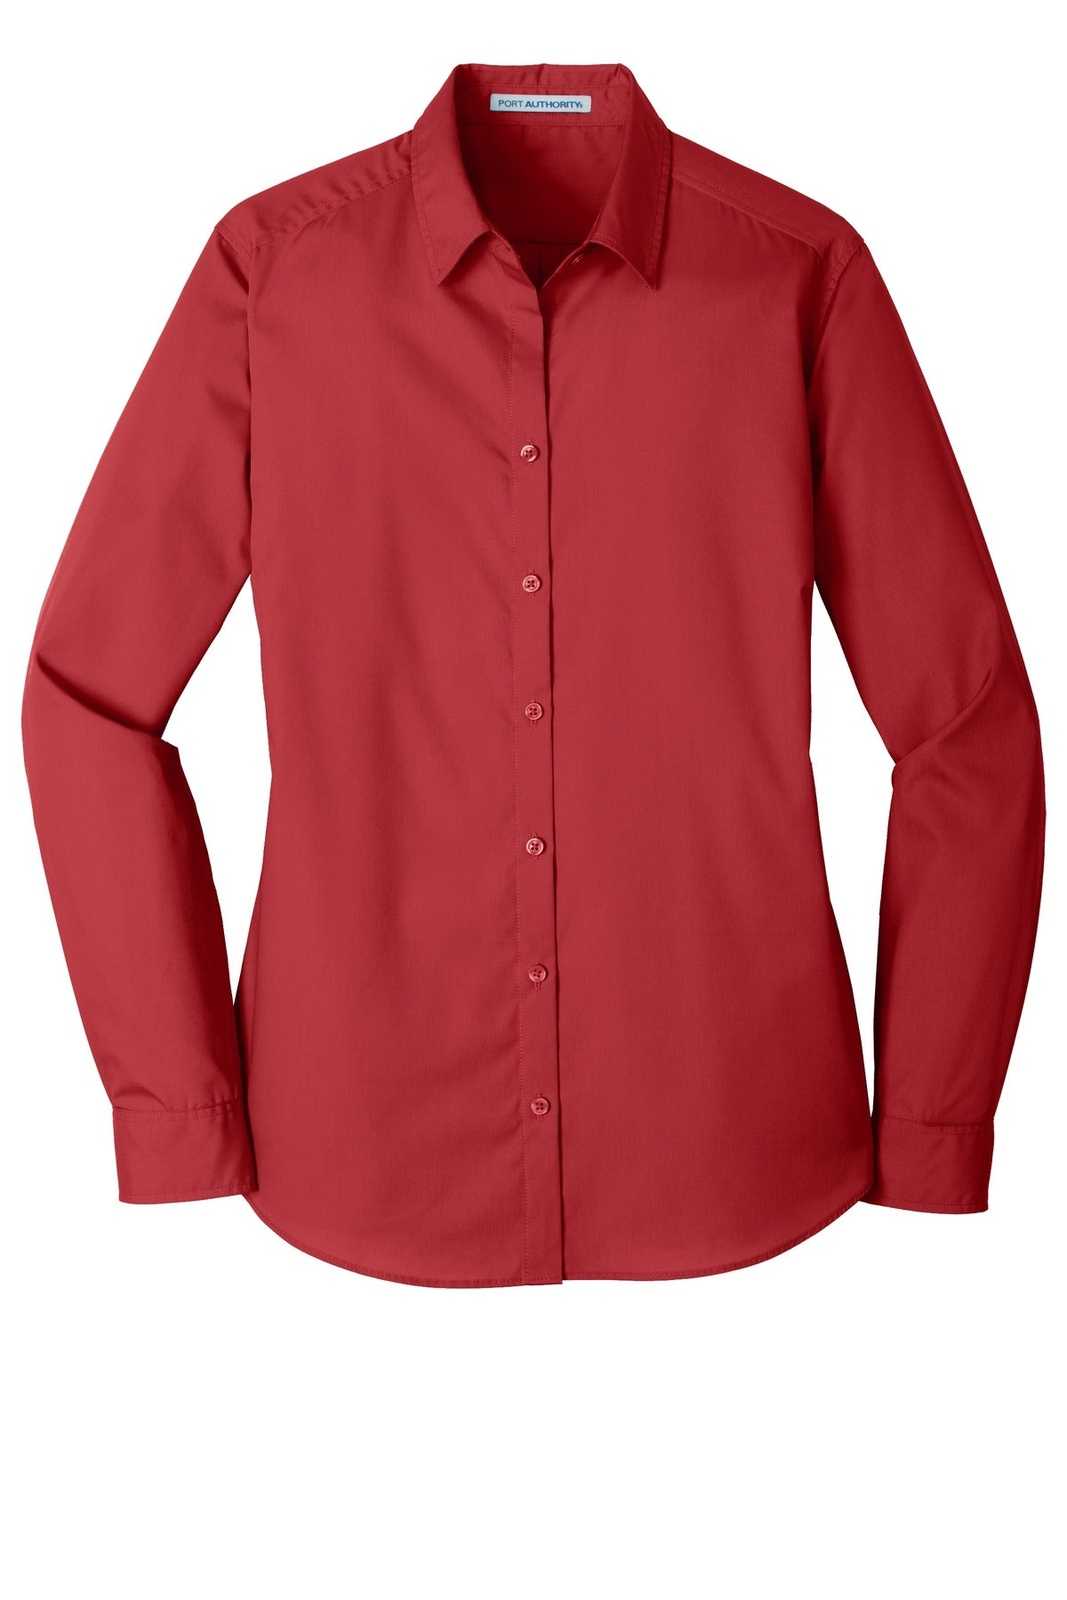 Port Authority LW100 Ladies Long Sleeve Carefree Poplin Shirt - Rich Red - HIT a Double - 5